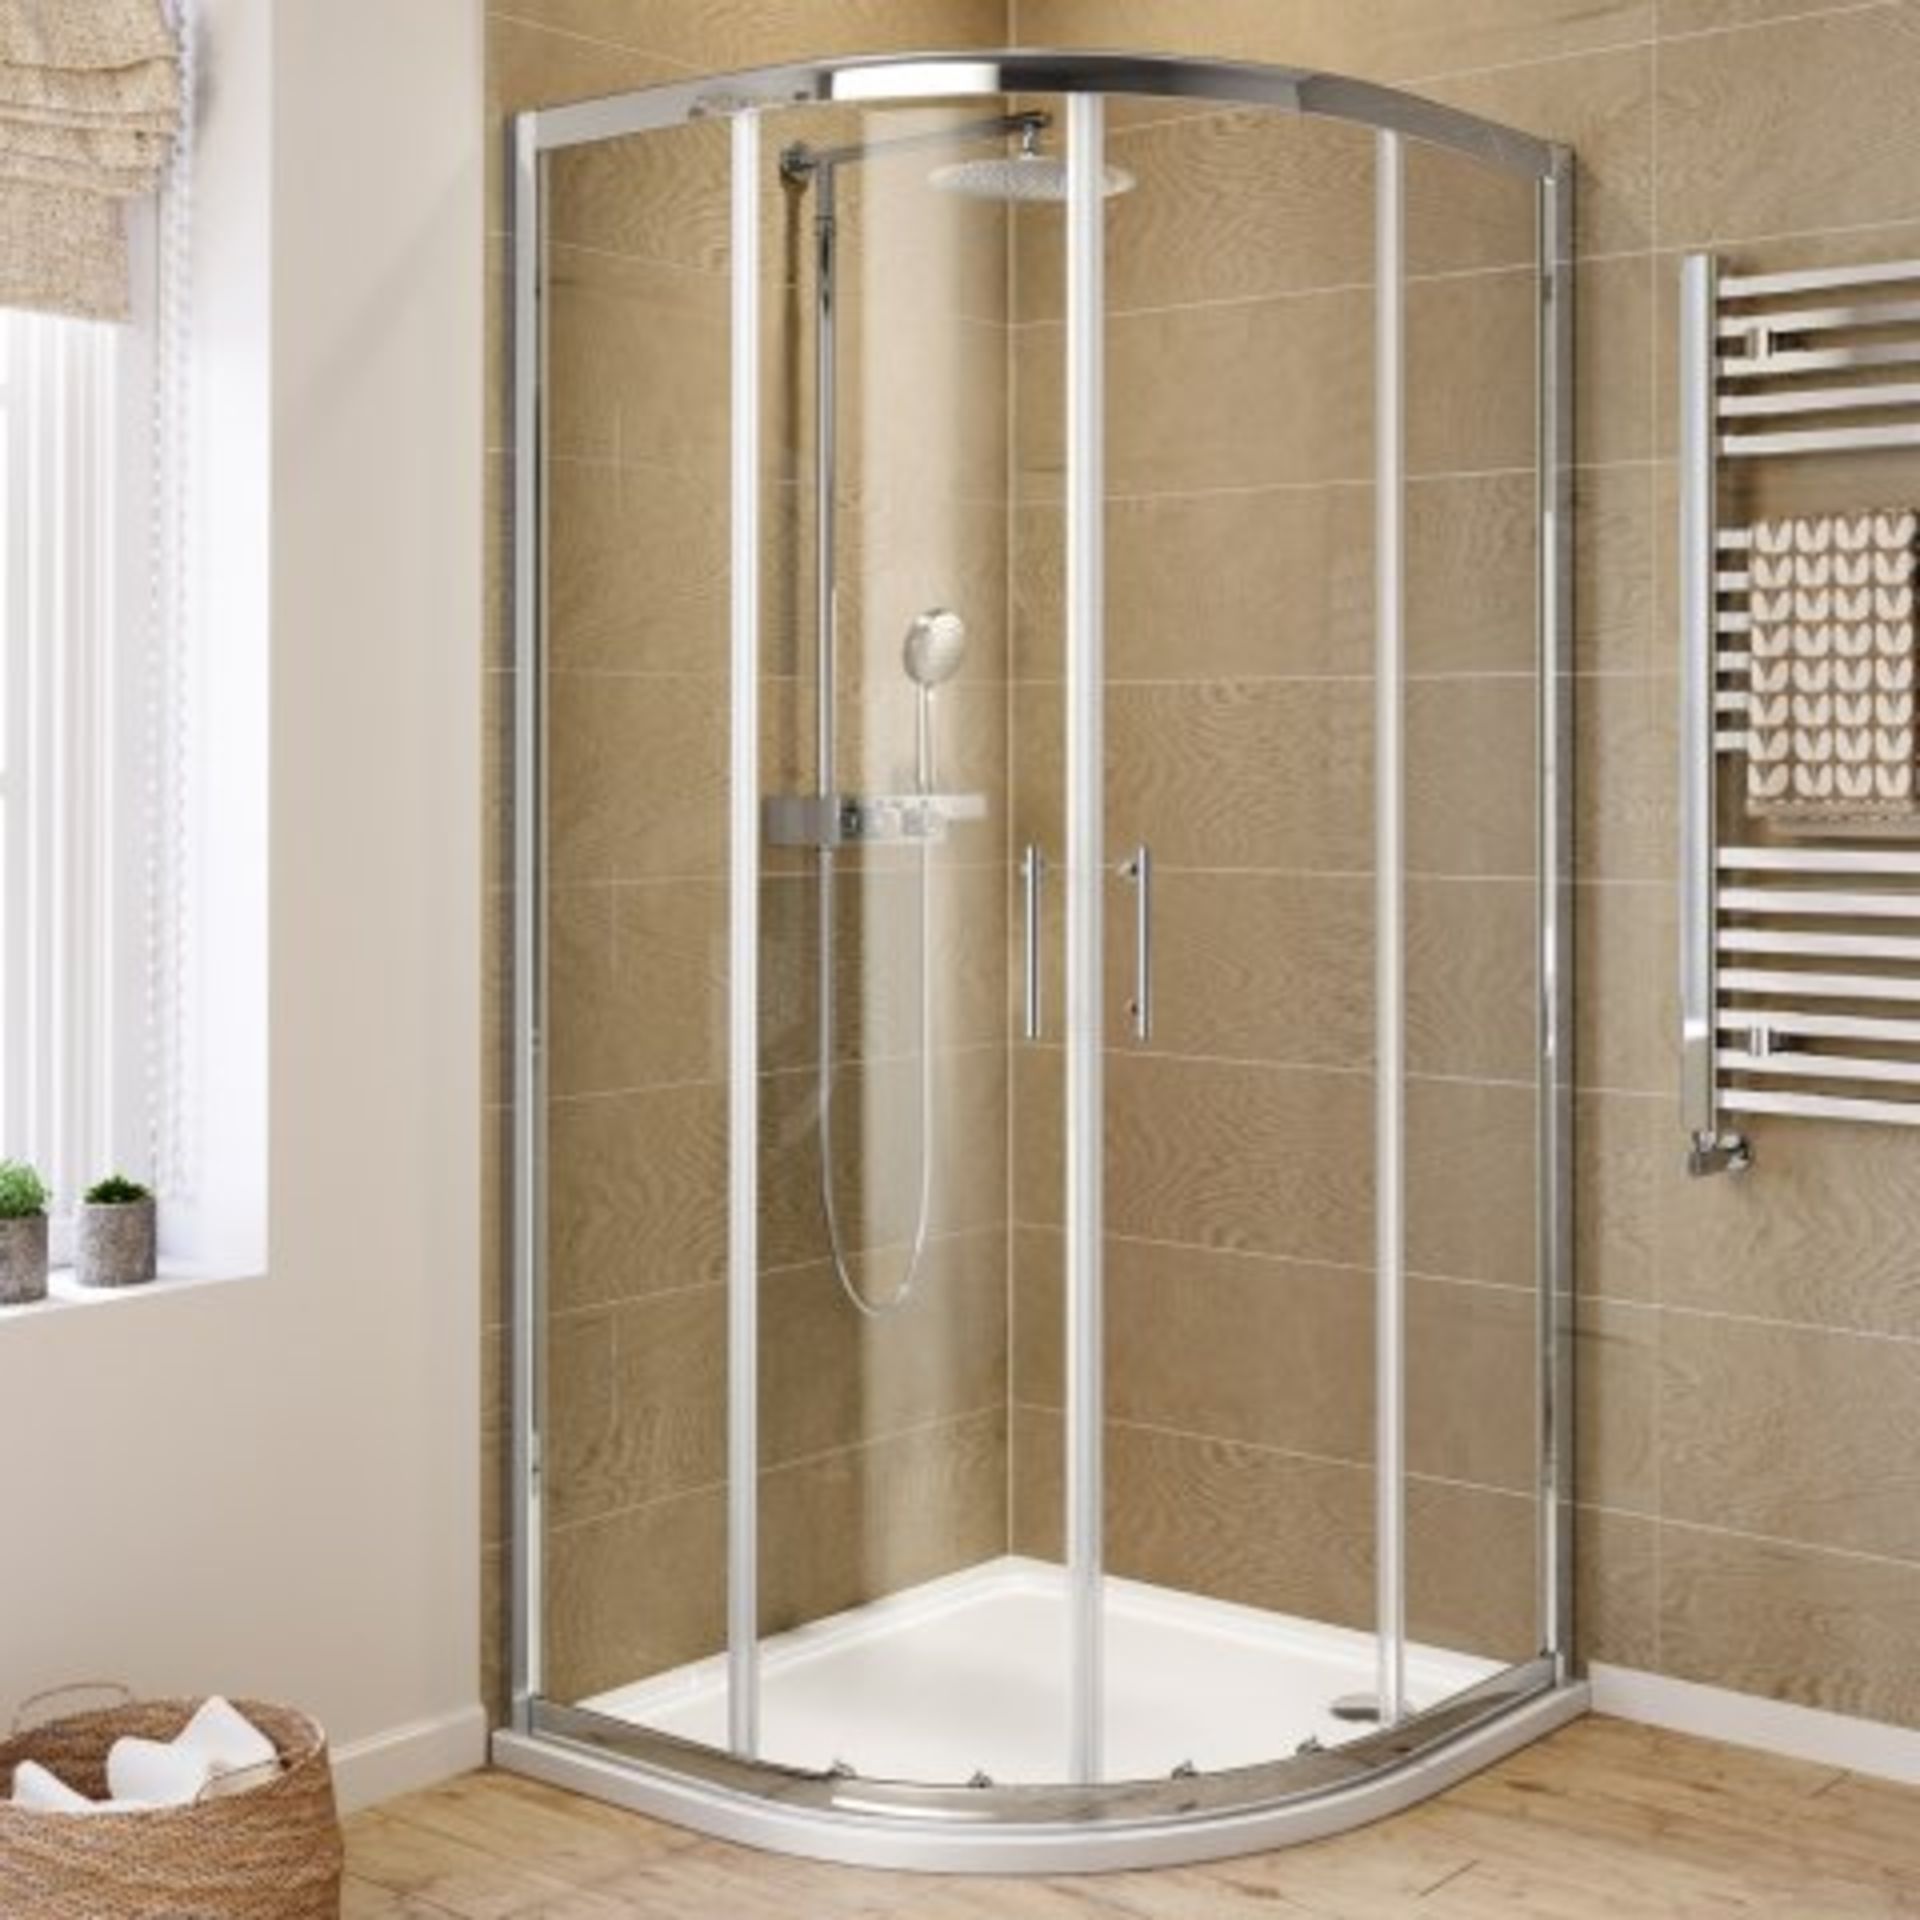 (O71) 900x900mm - 6mm - Elements Quadrant Shower Enclosure. RRP £272.99. Make the most of that - Image 2 of 5